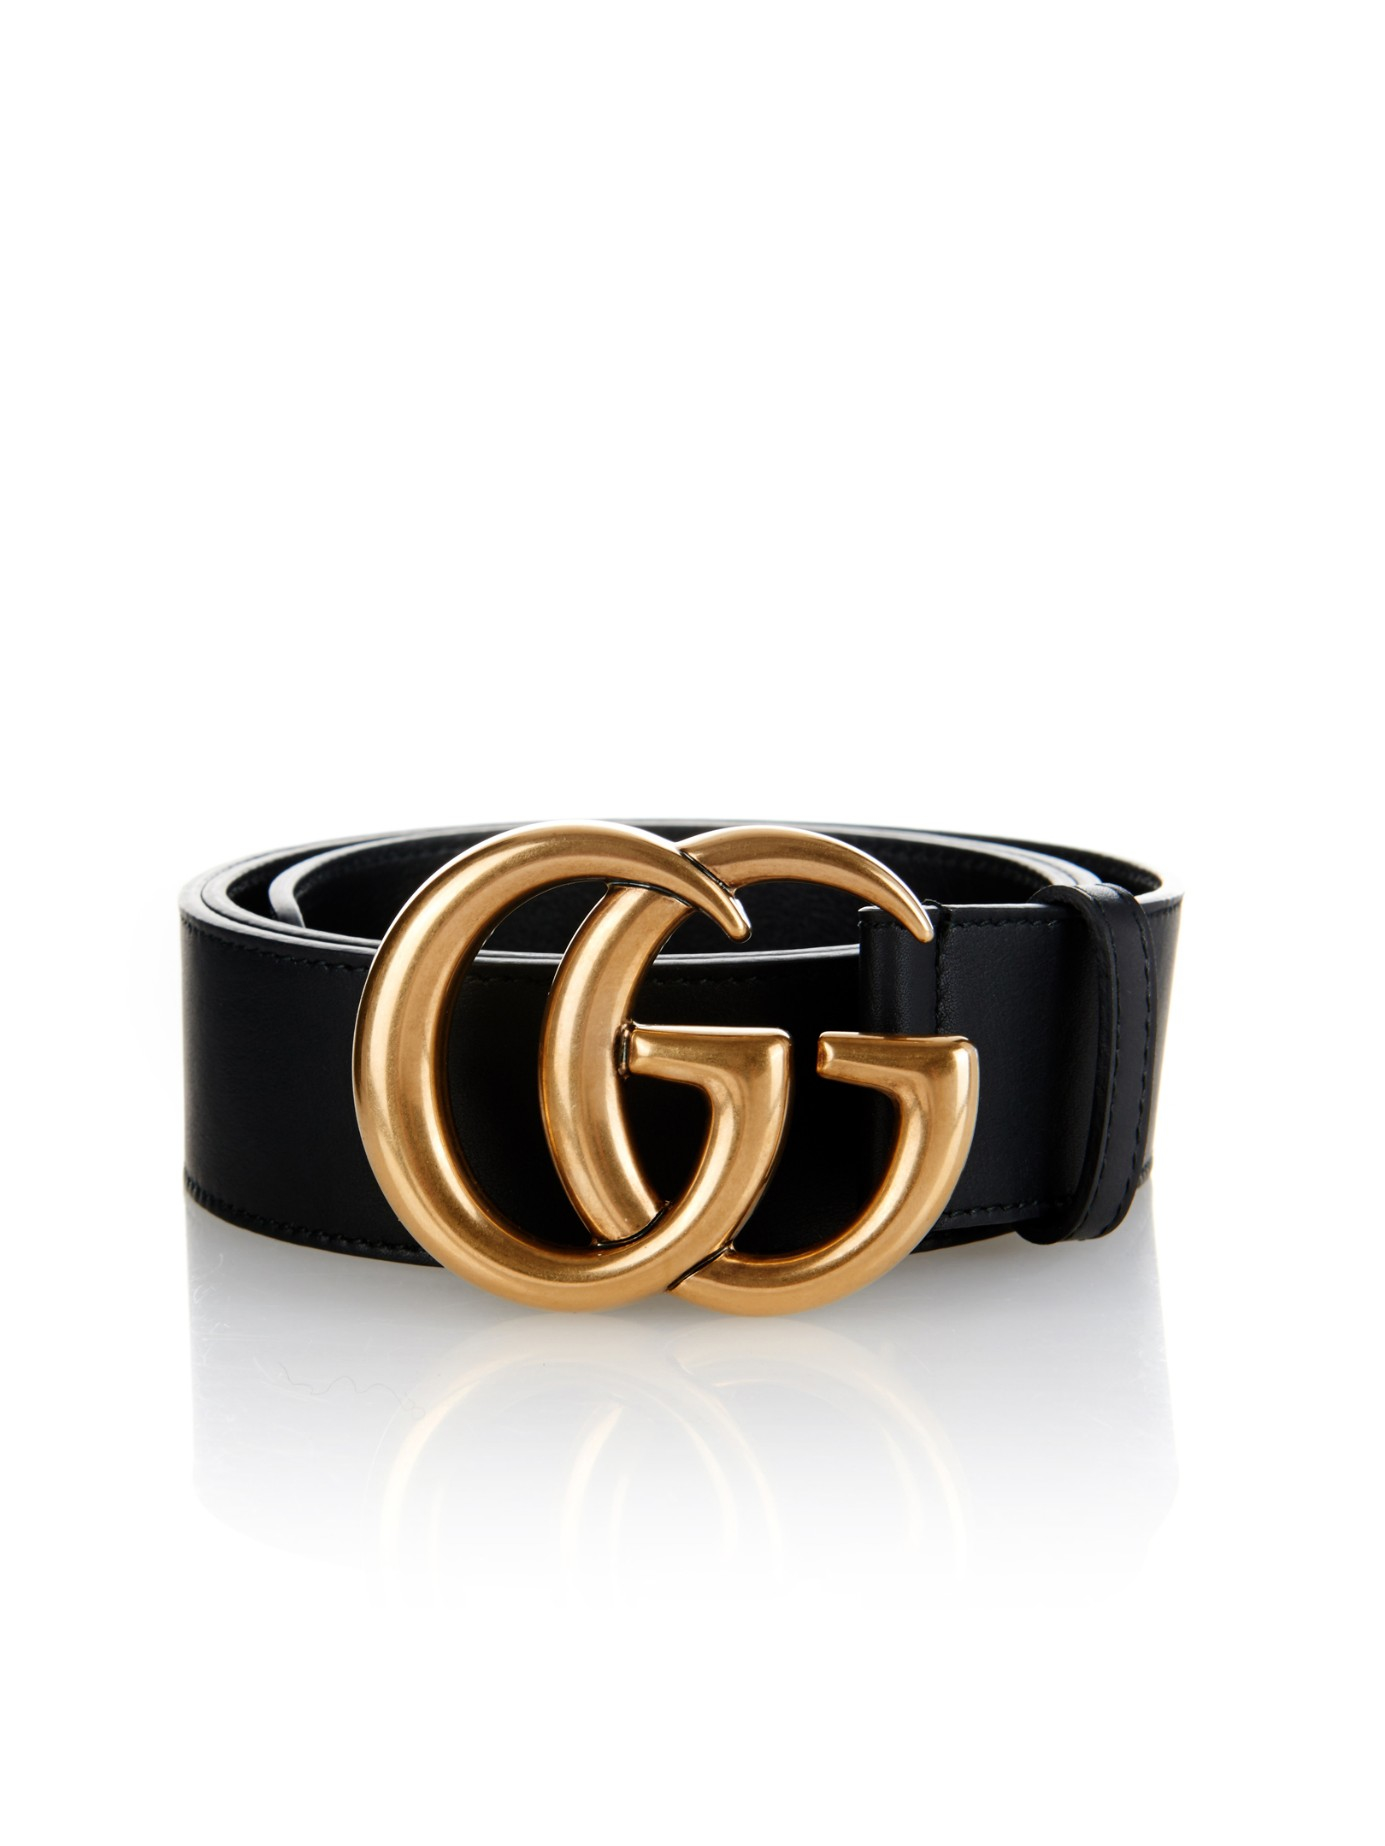 GUCCI GOLD BUCKLE GG BELT - BLACK (Sizes Available)